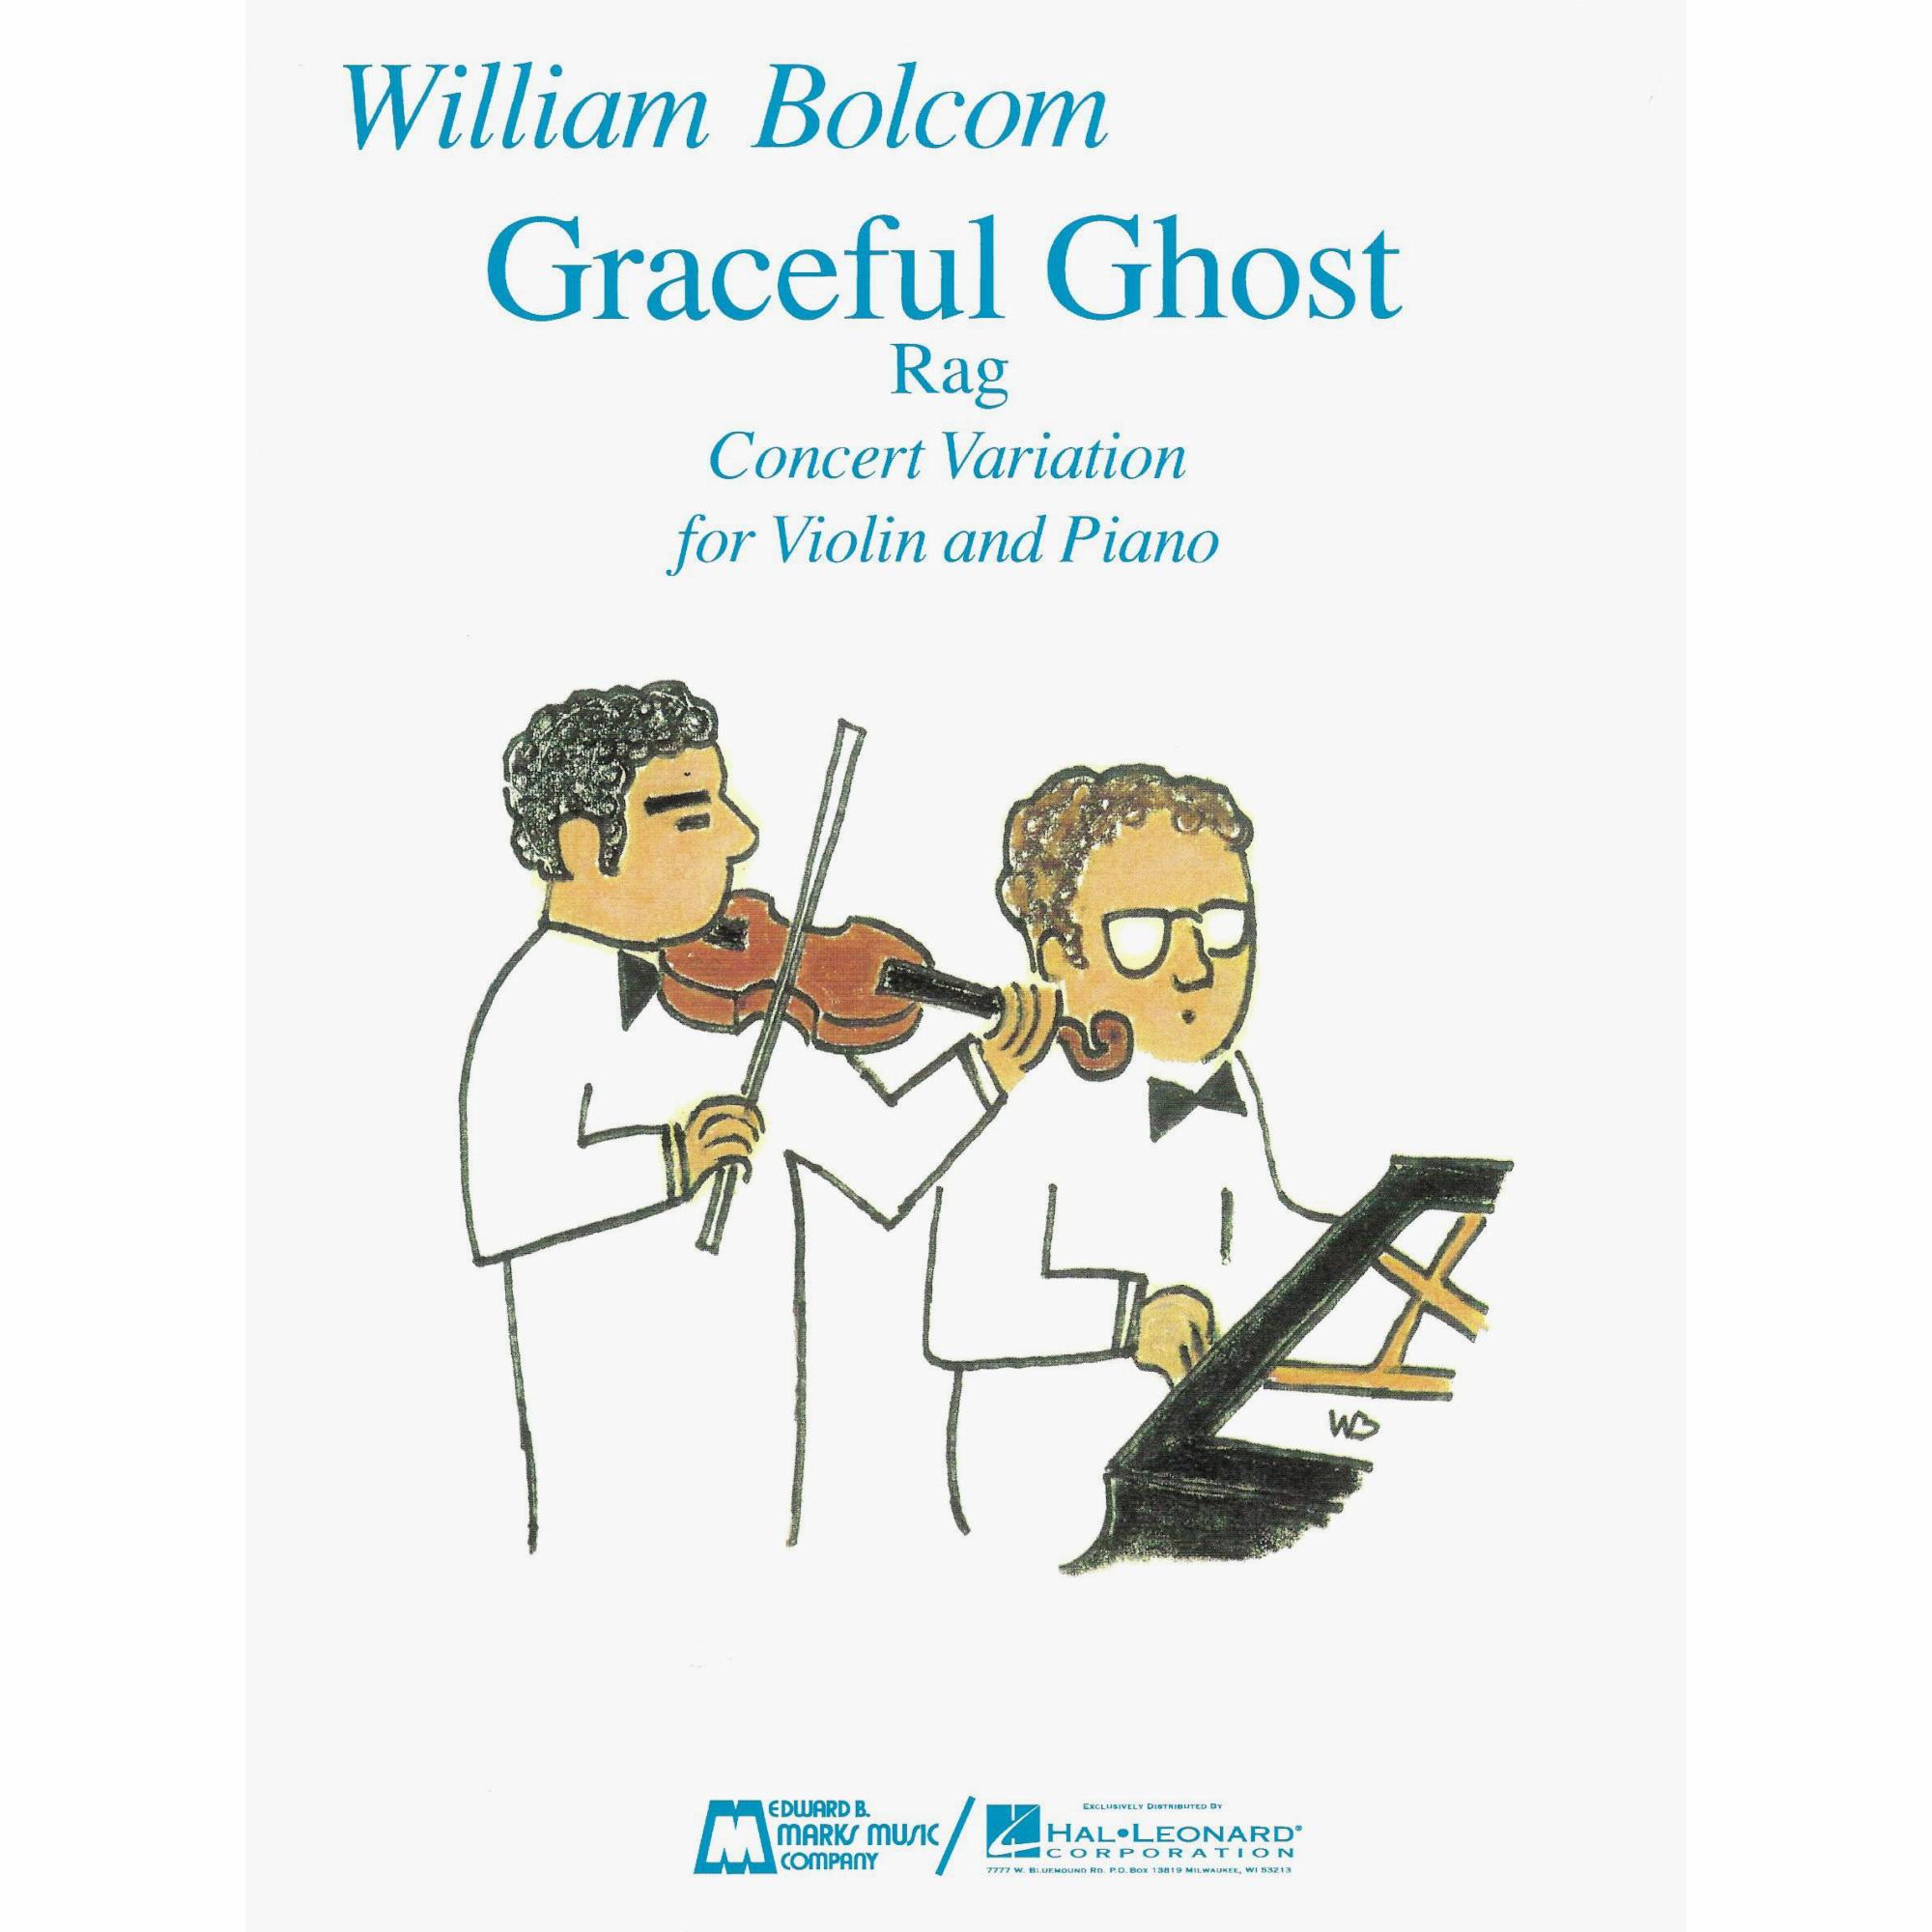 Bolcom -- Graceful Ghost Rag for Violin and Piano